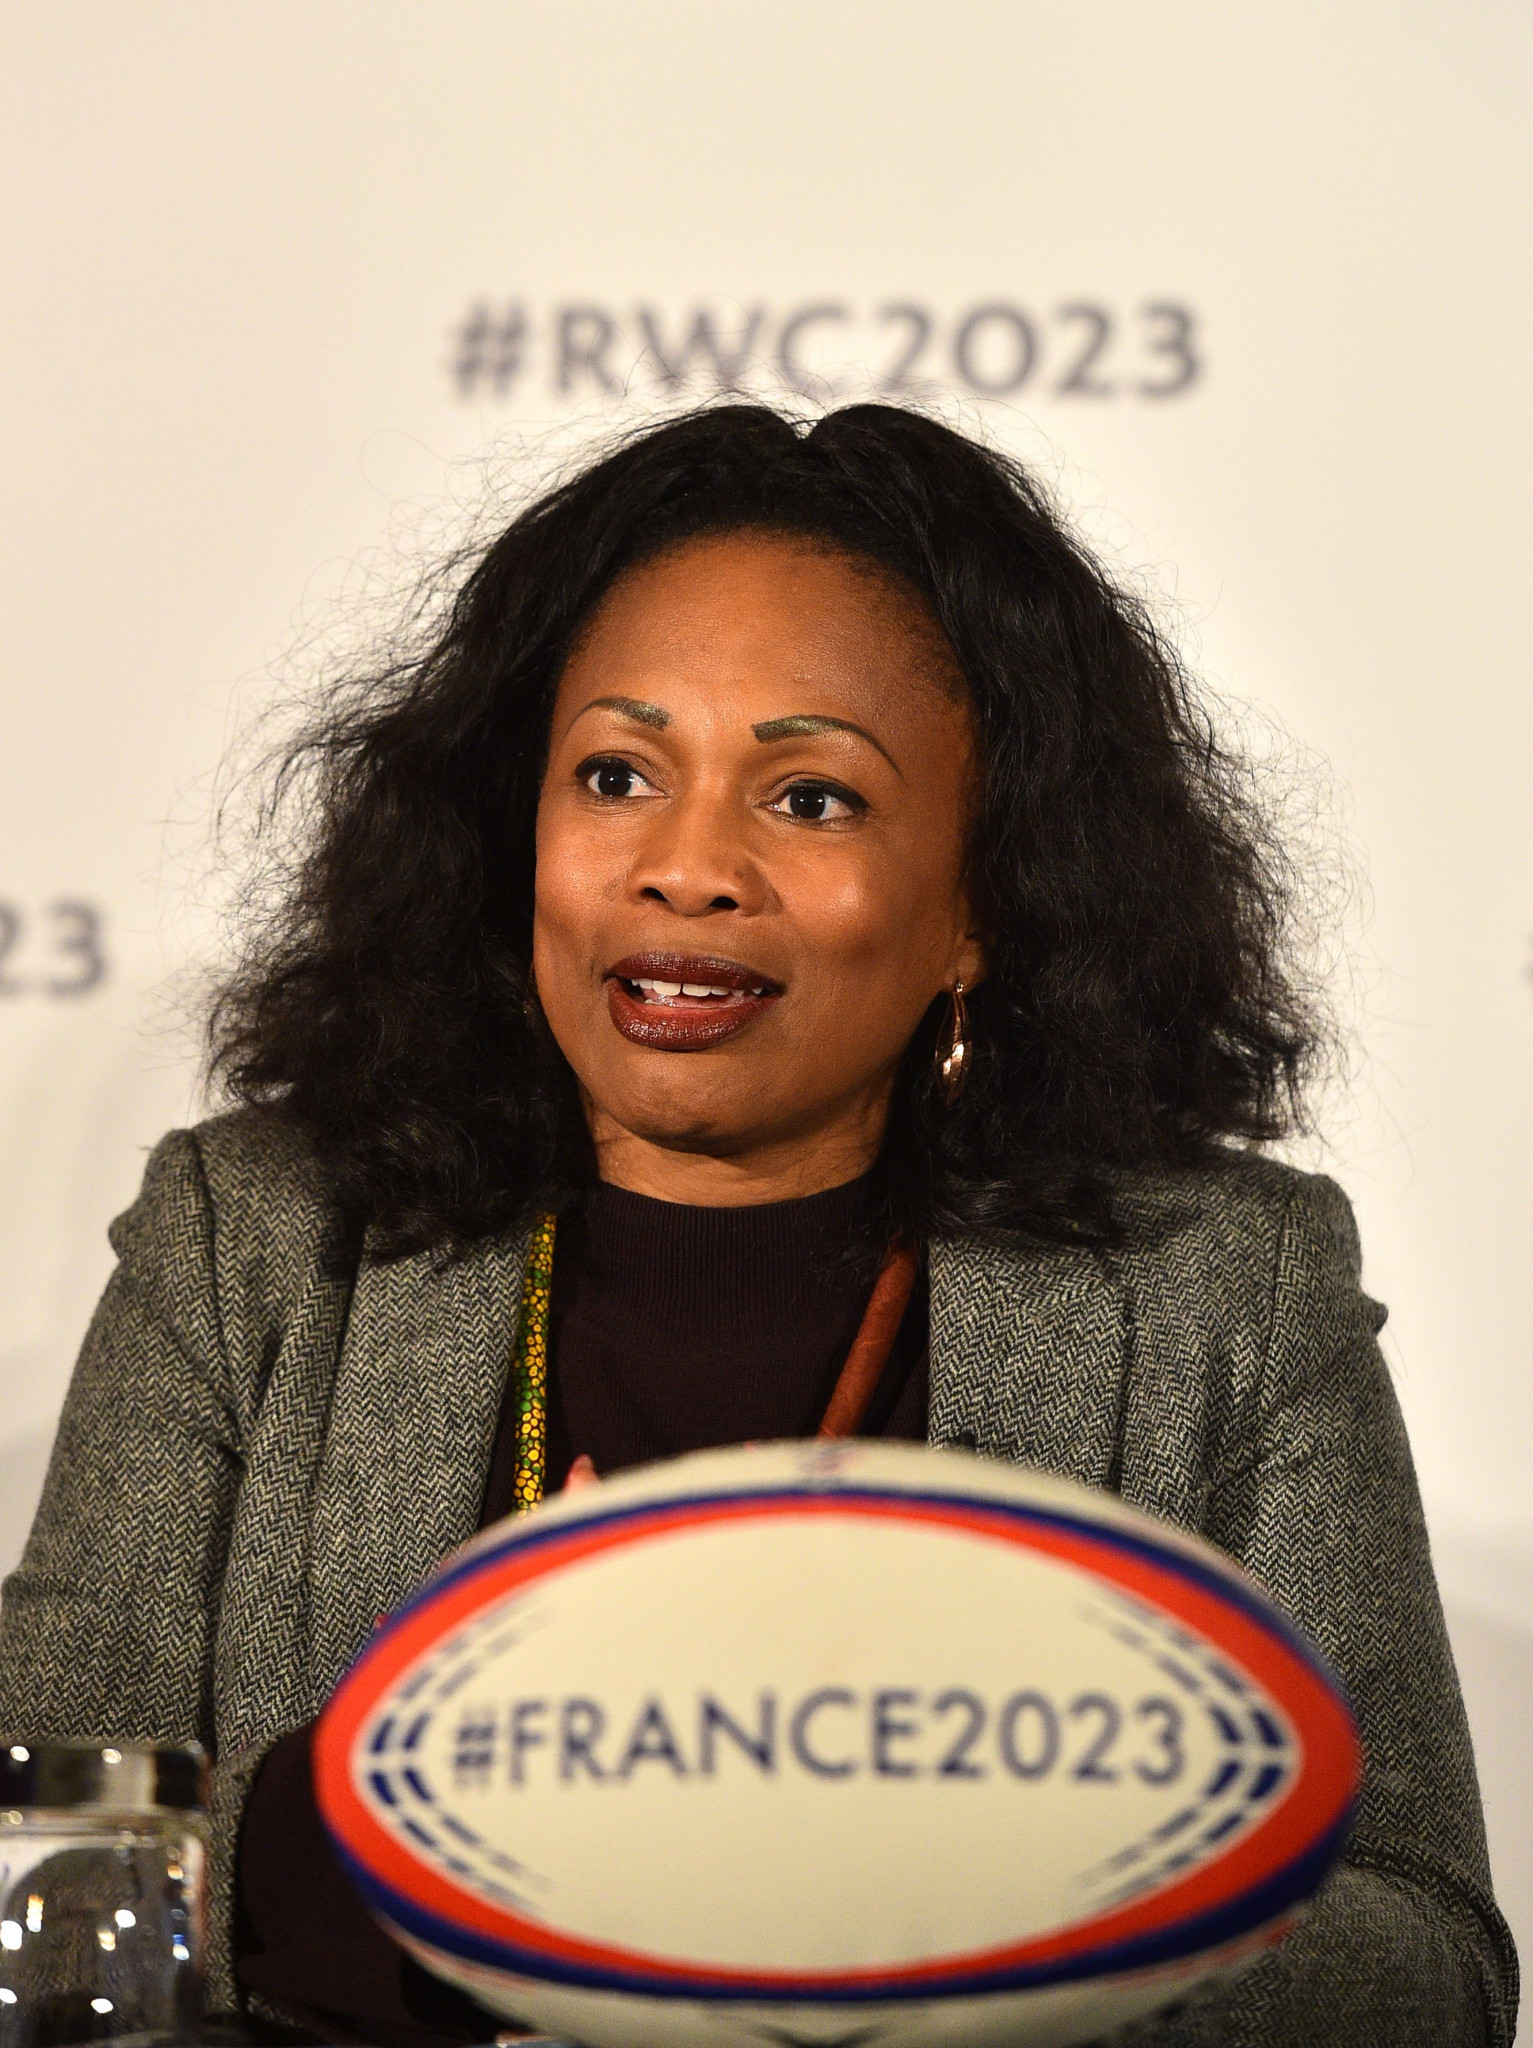 French Sports Minister Laura Flessel led her country's delegation who were making a presentation in London to host the 2023 Rugby World Cup for the third time ©Getty Image